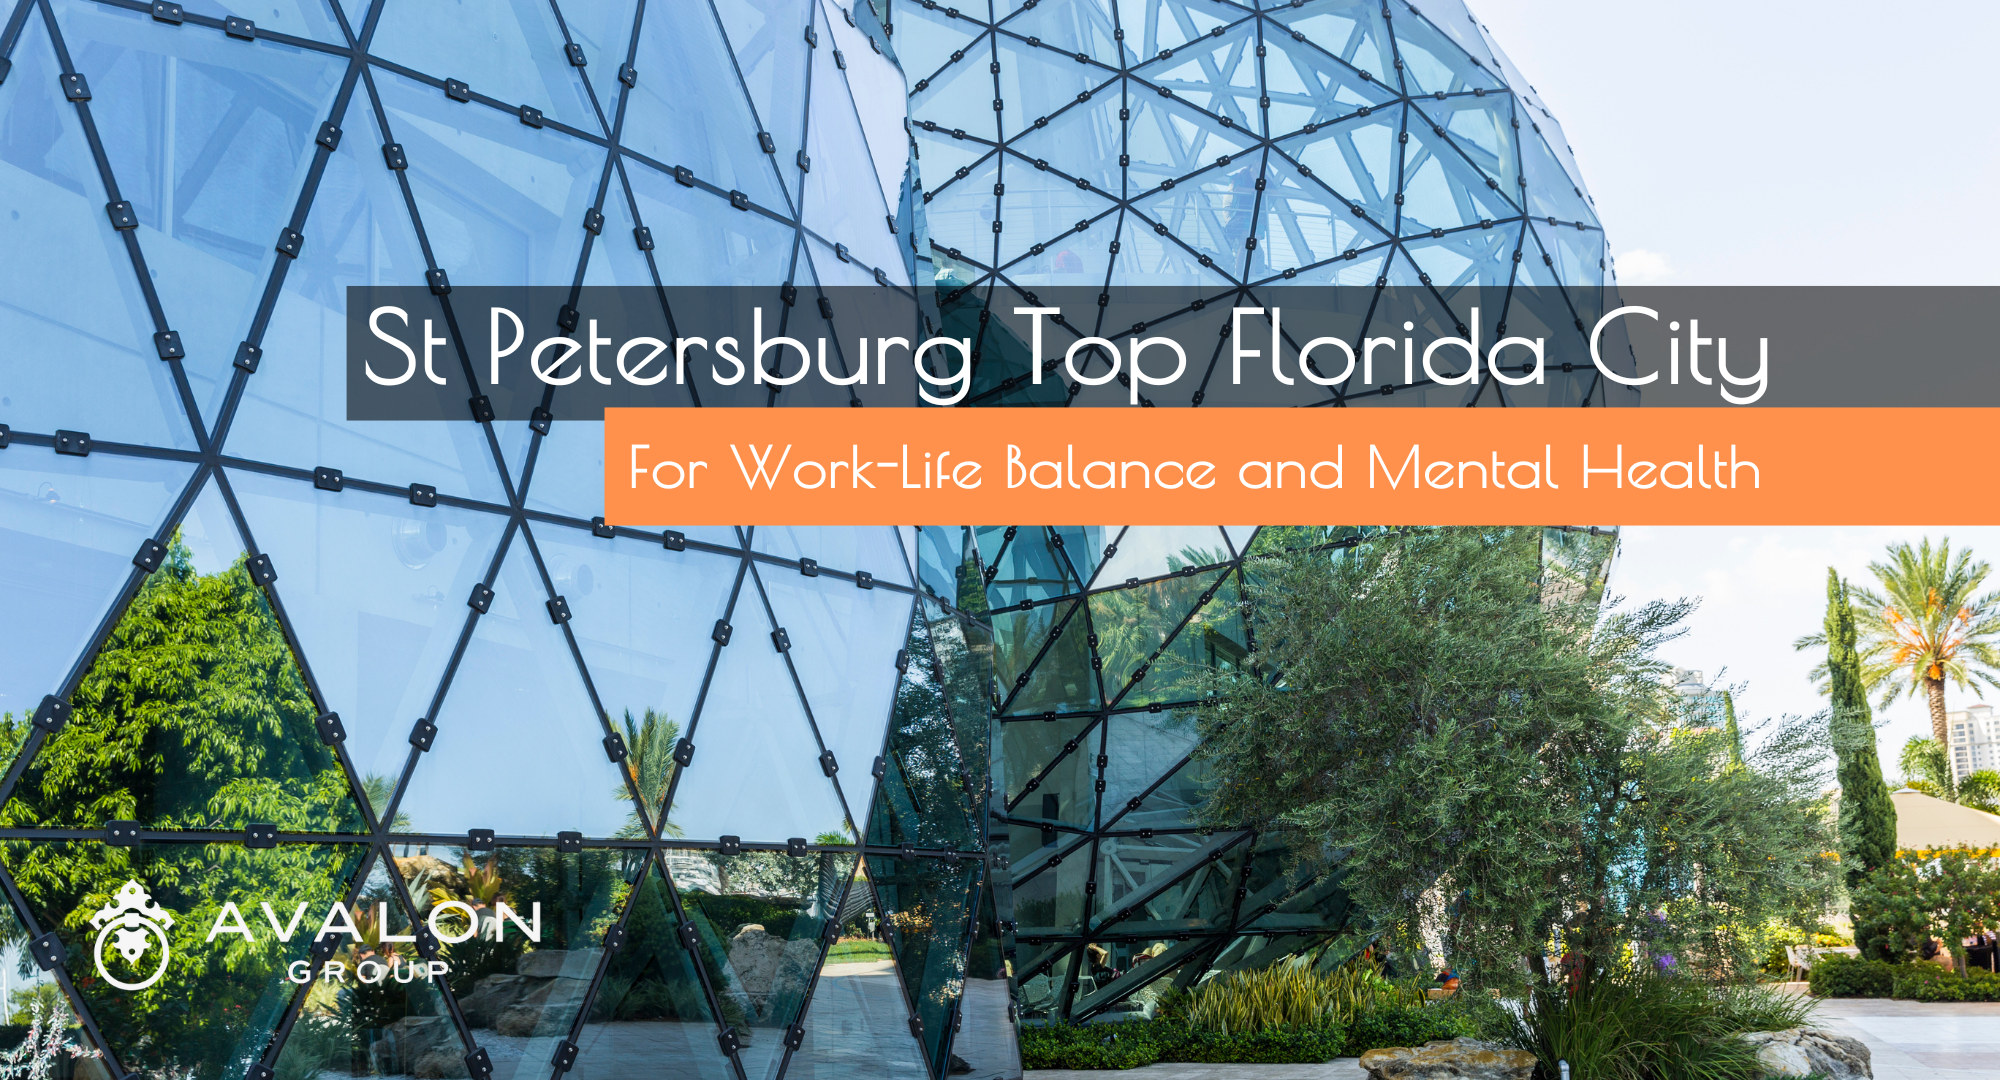 St Petersburg Top Florida City, cover pic in front of the Glass Triangle windows at the Dali Museum. The windows are blue, and the title is on a black and orange background.